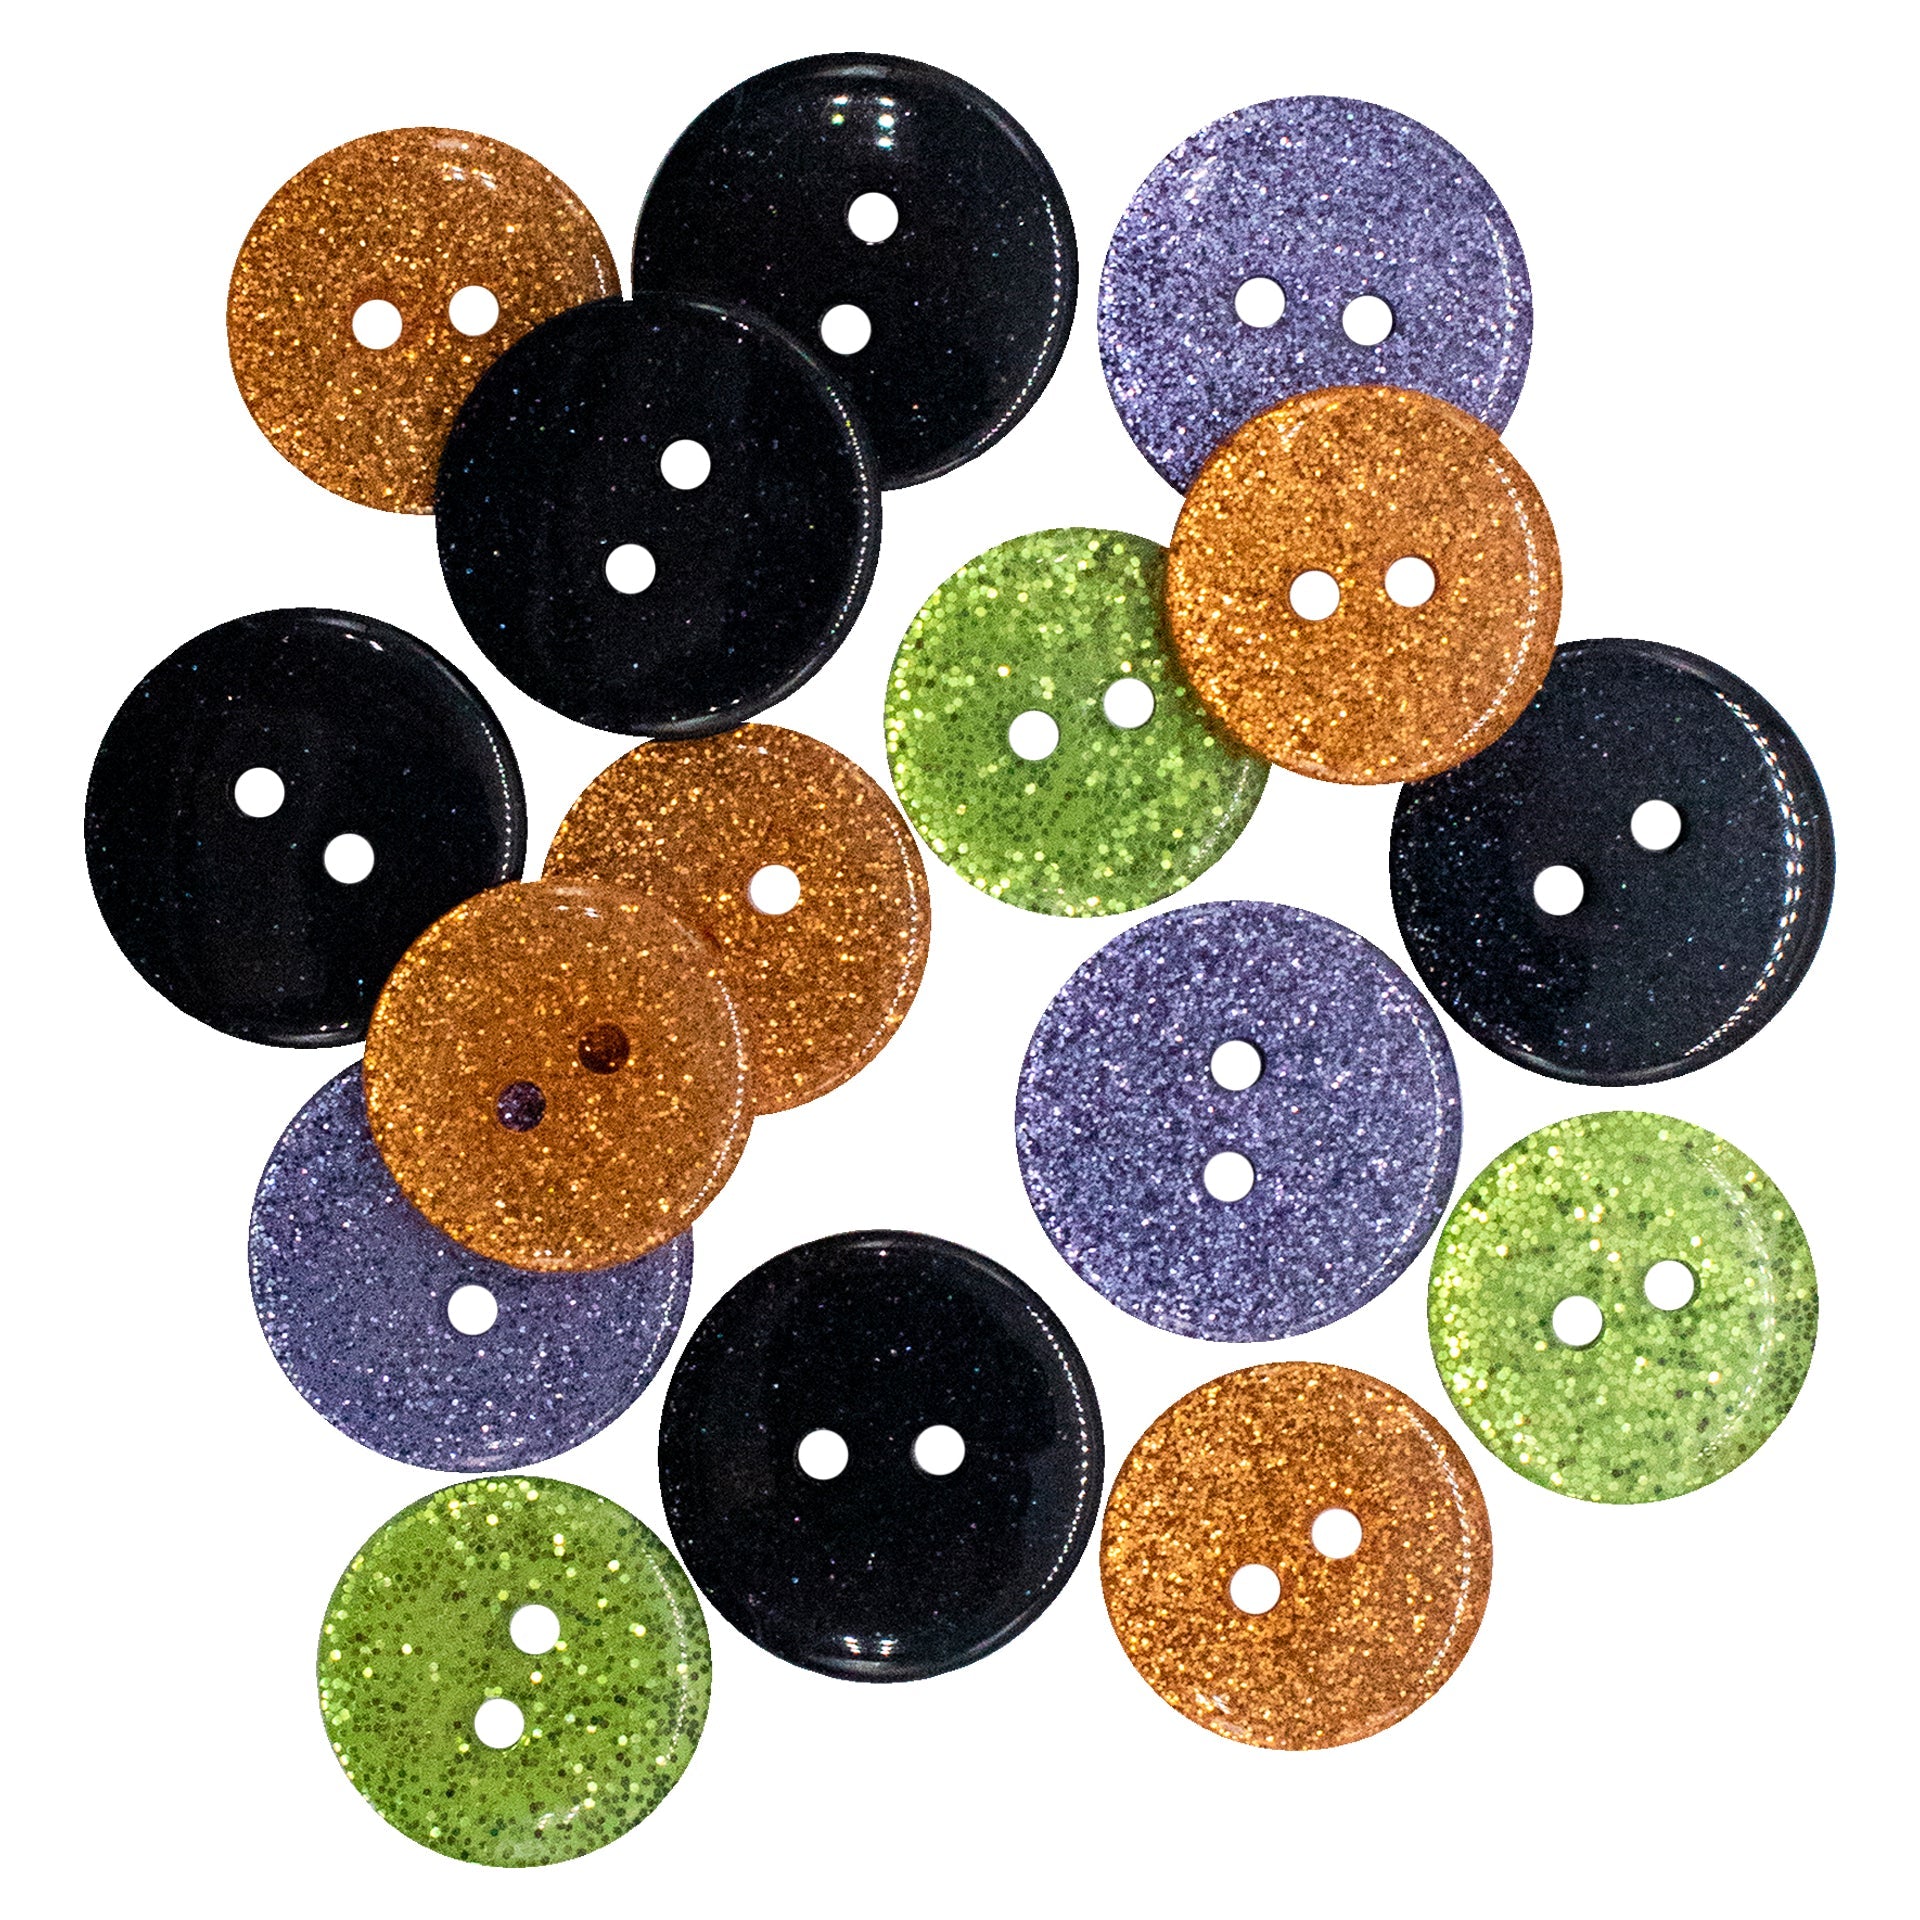 Spellbound - Buttons Galore and More